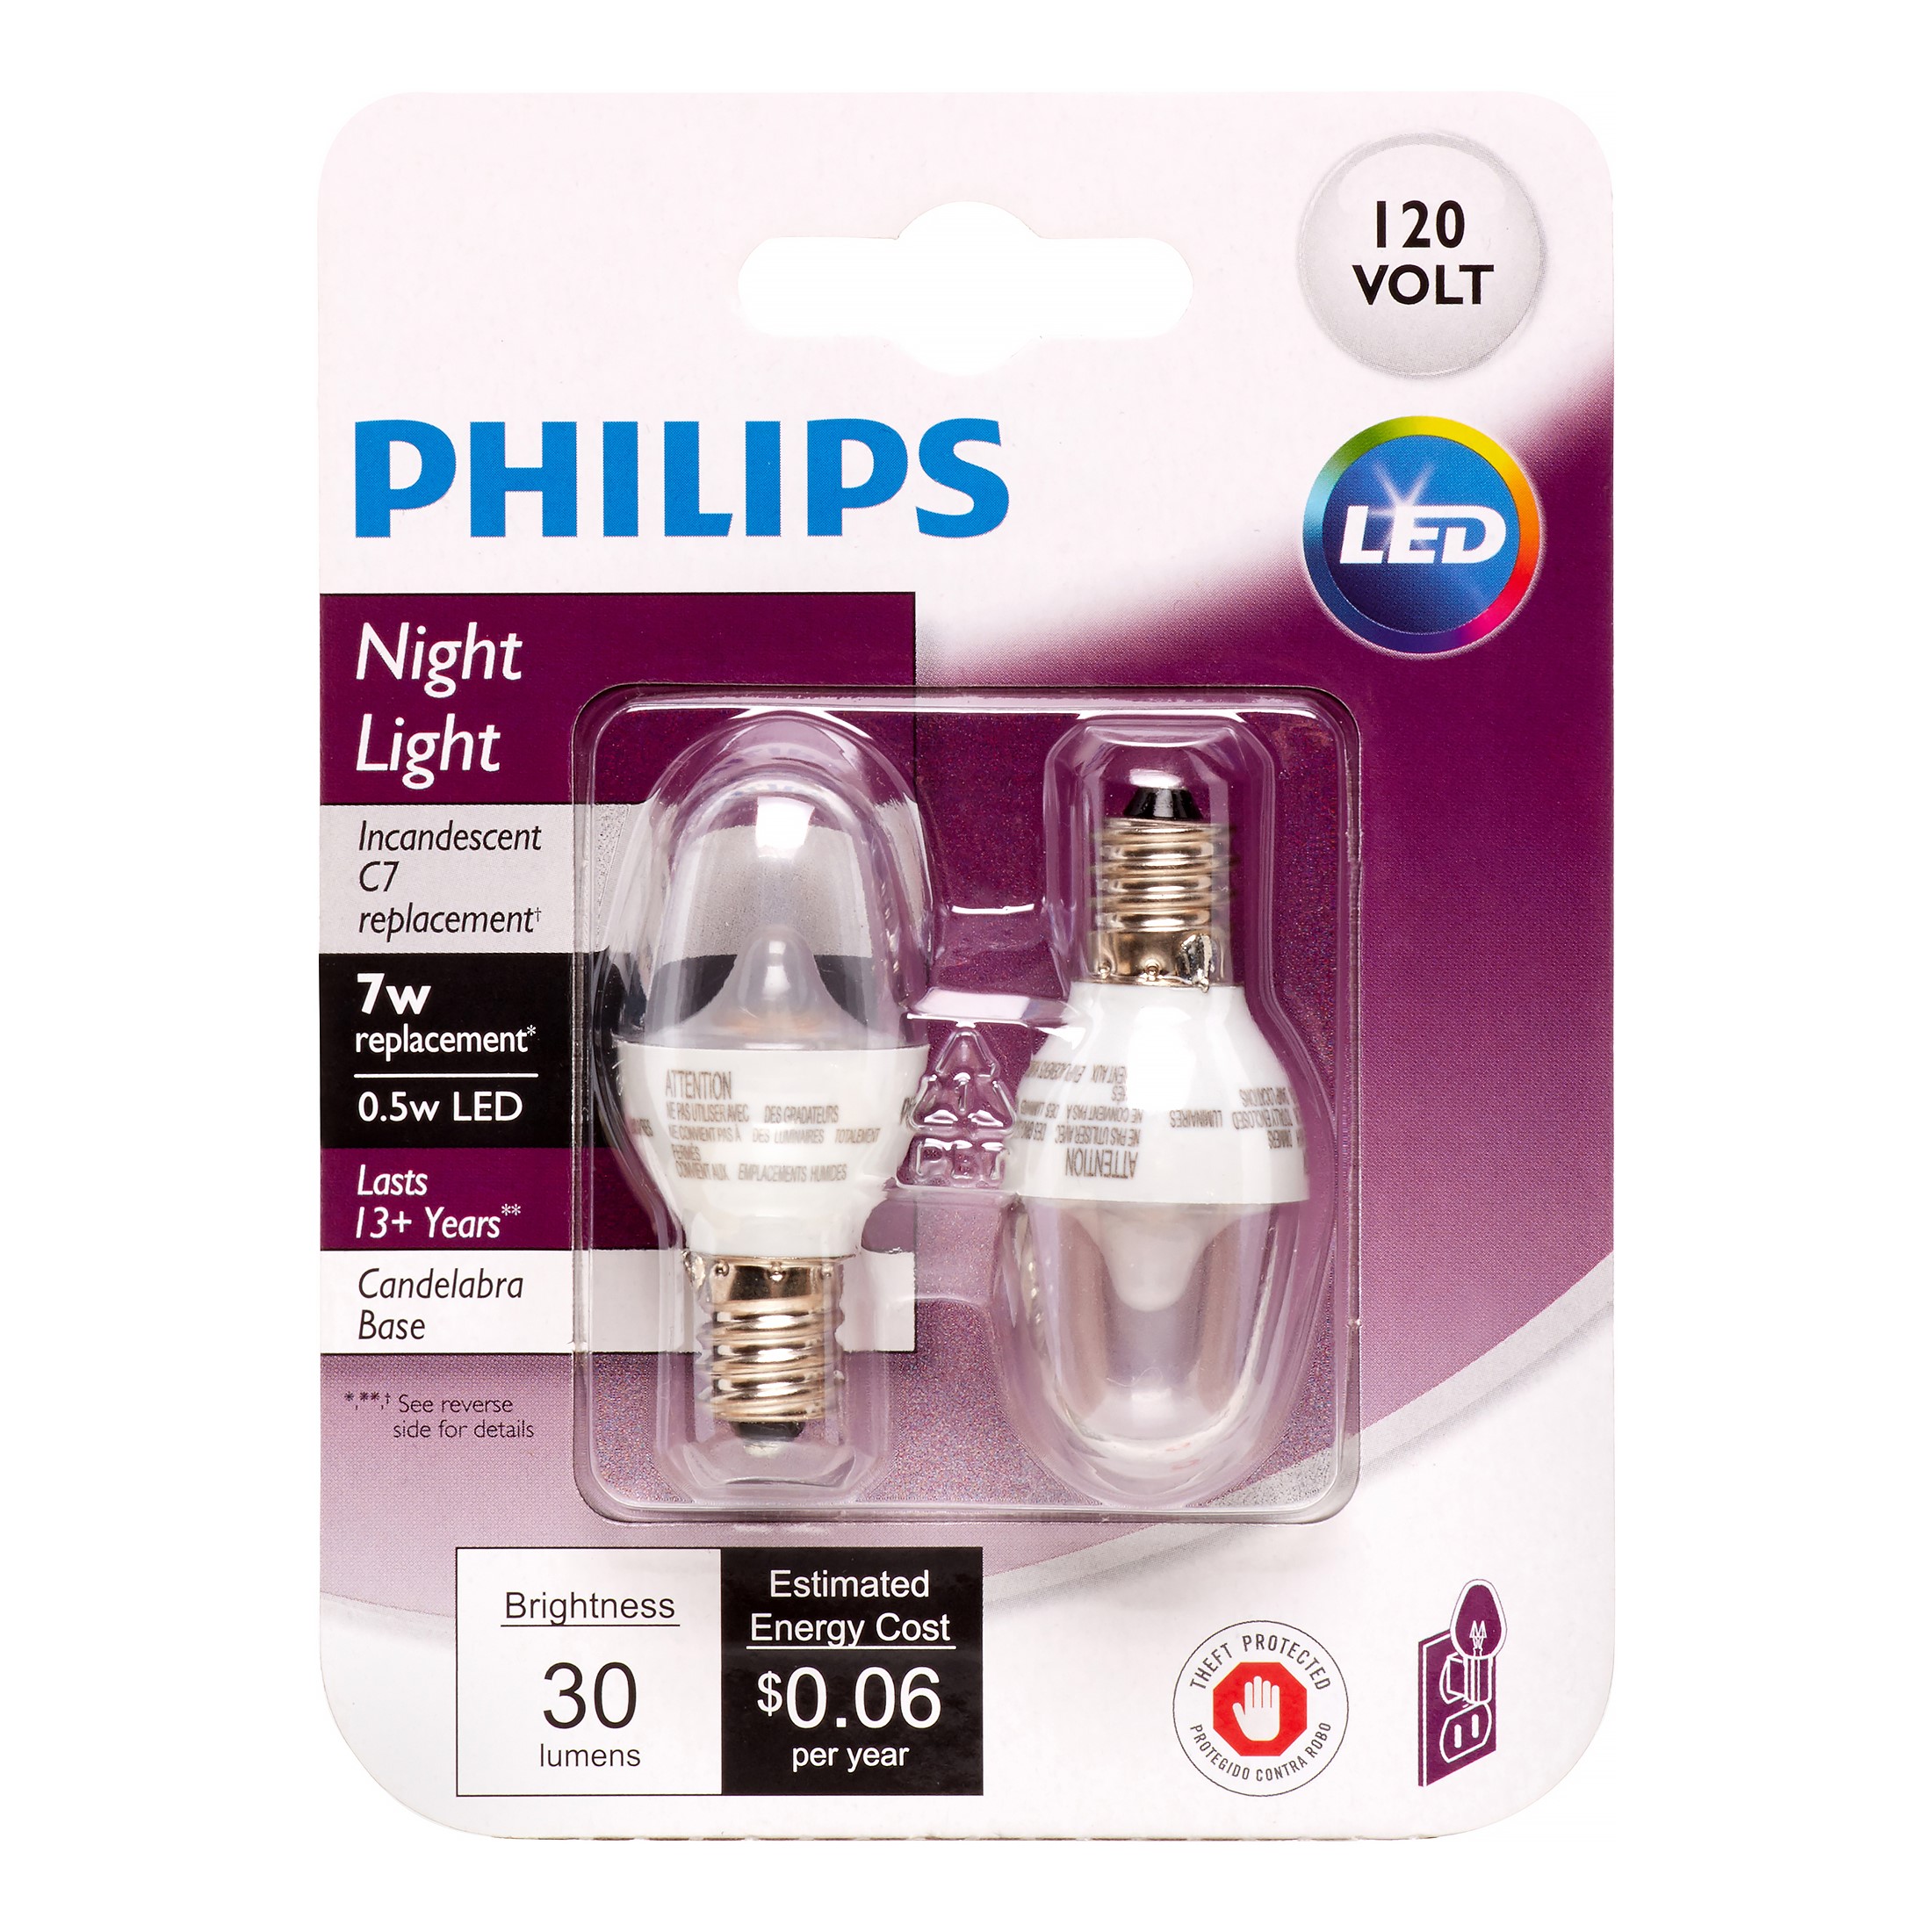 2 New Christmas Philips C7 Light with Clear Cover for Paper Stars